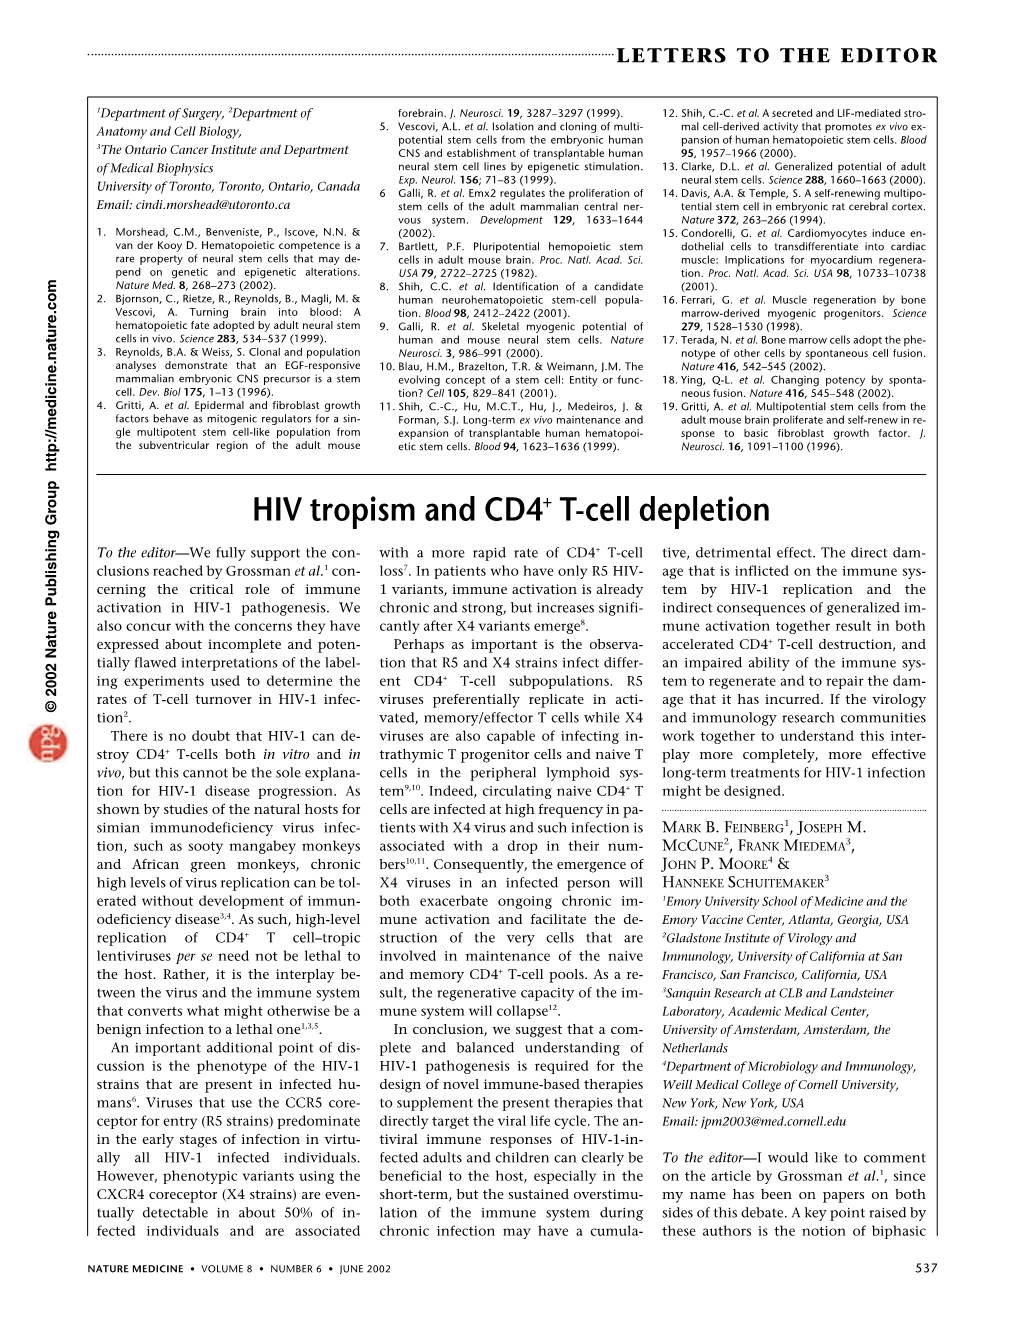 HIV Tropism and CD4+ T-Cell Depletion